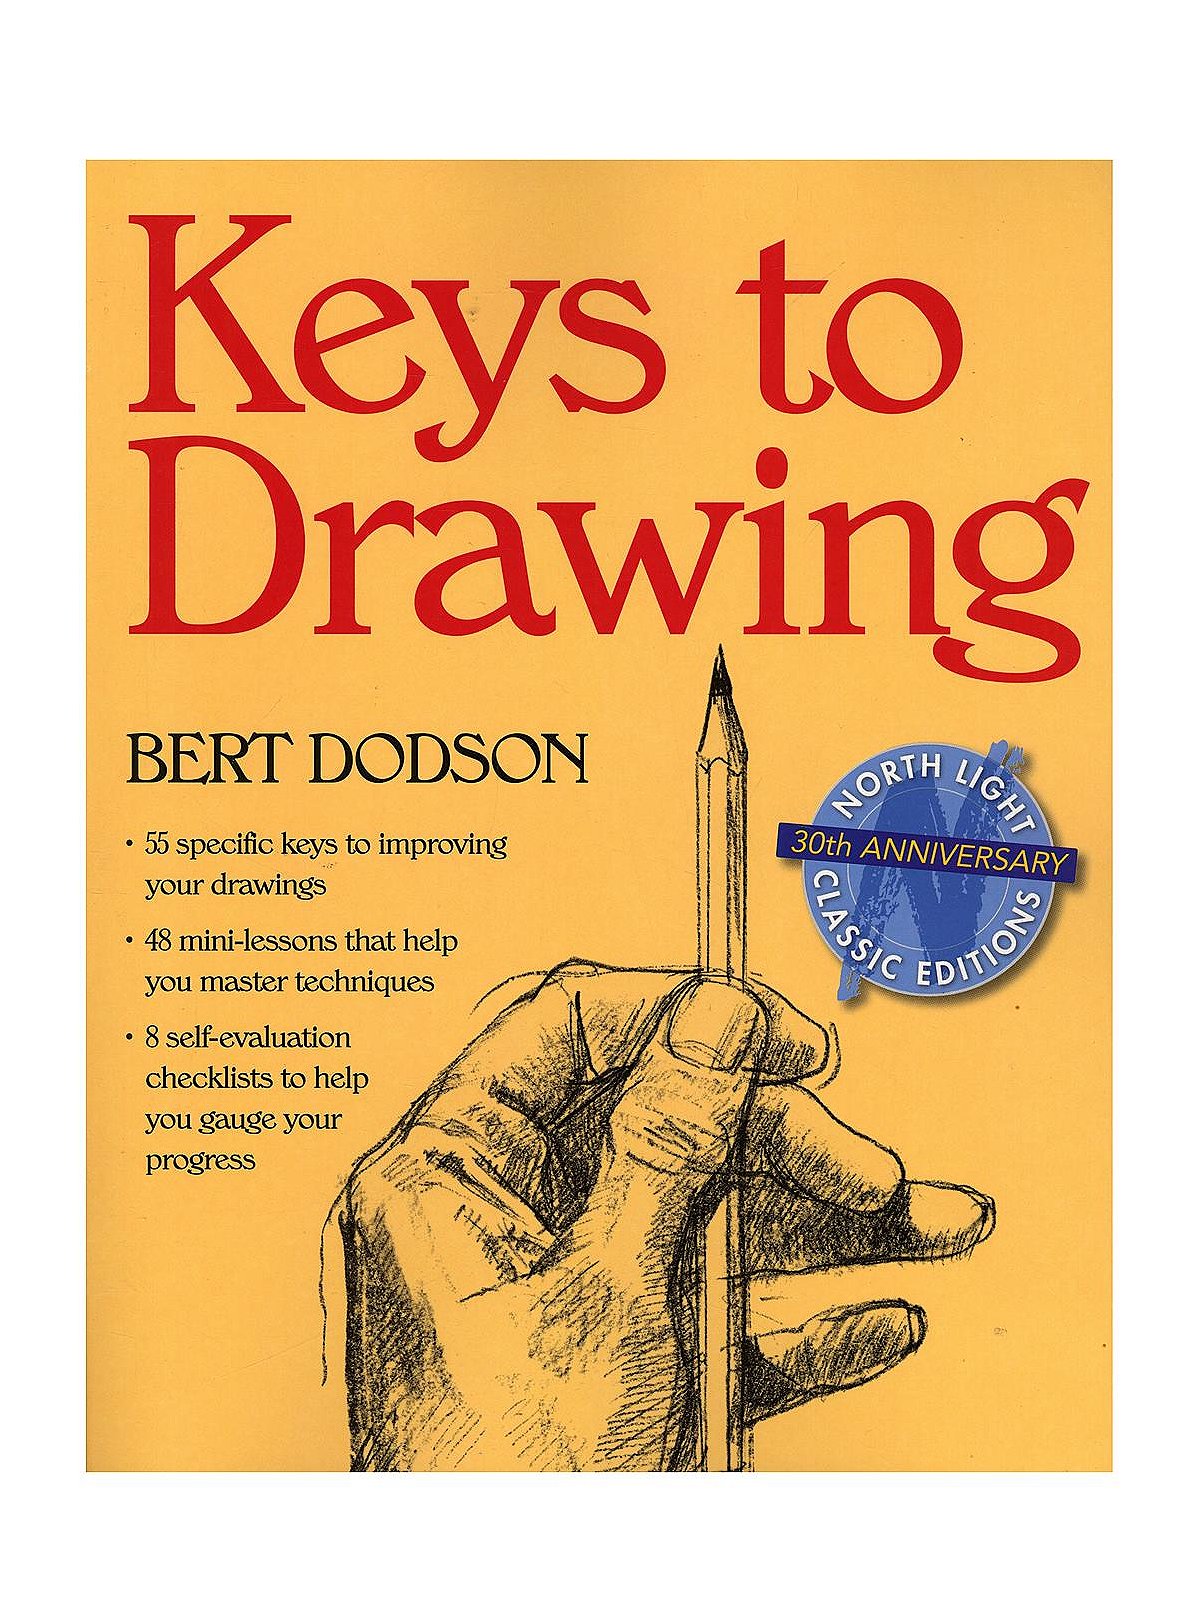 Keys to Drawing with Imagination on Apple Books